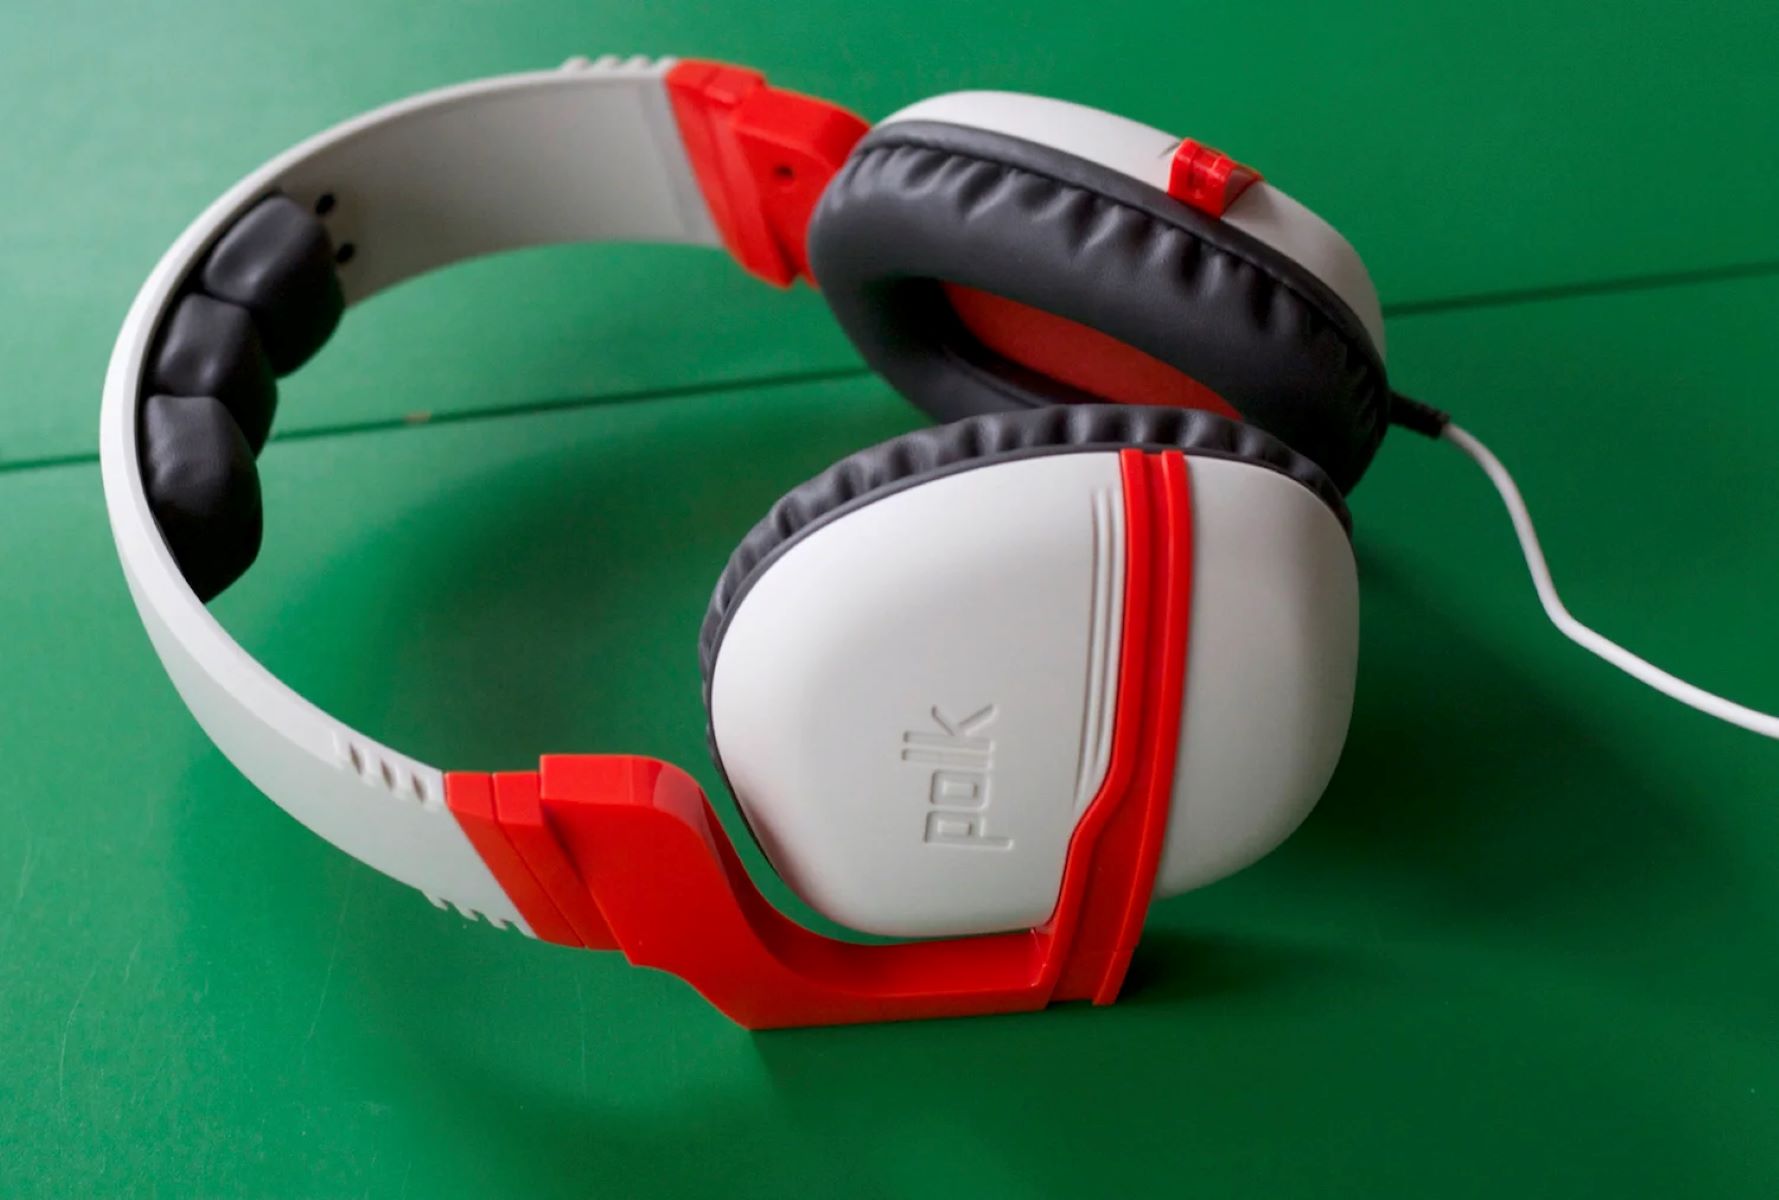 How To Raise The Volume Of Polk Full Immersion Gaming Headset